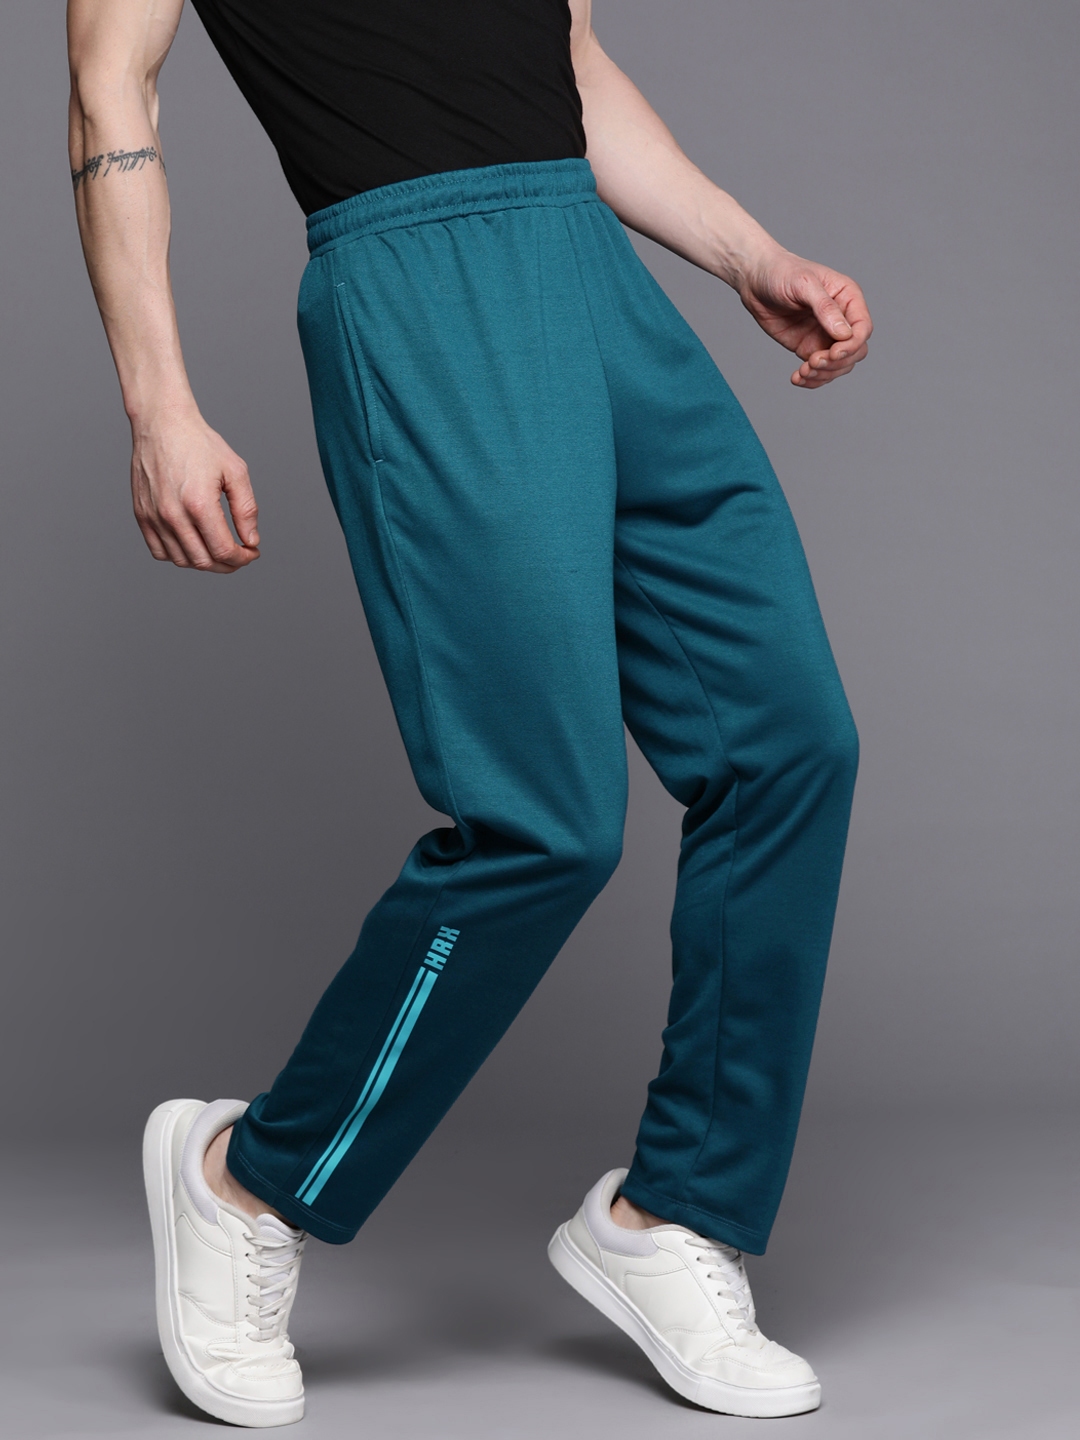 RBX Teal Active Pants Size XL - 61% off